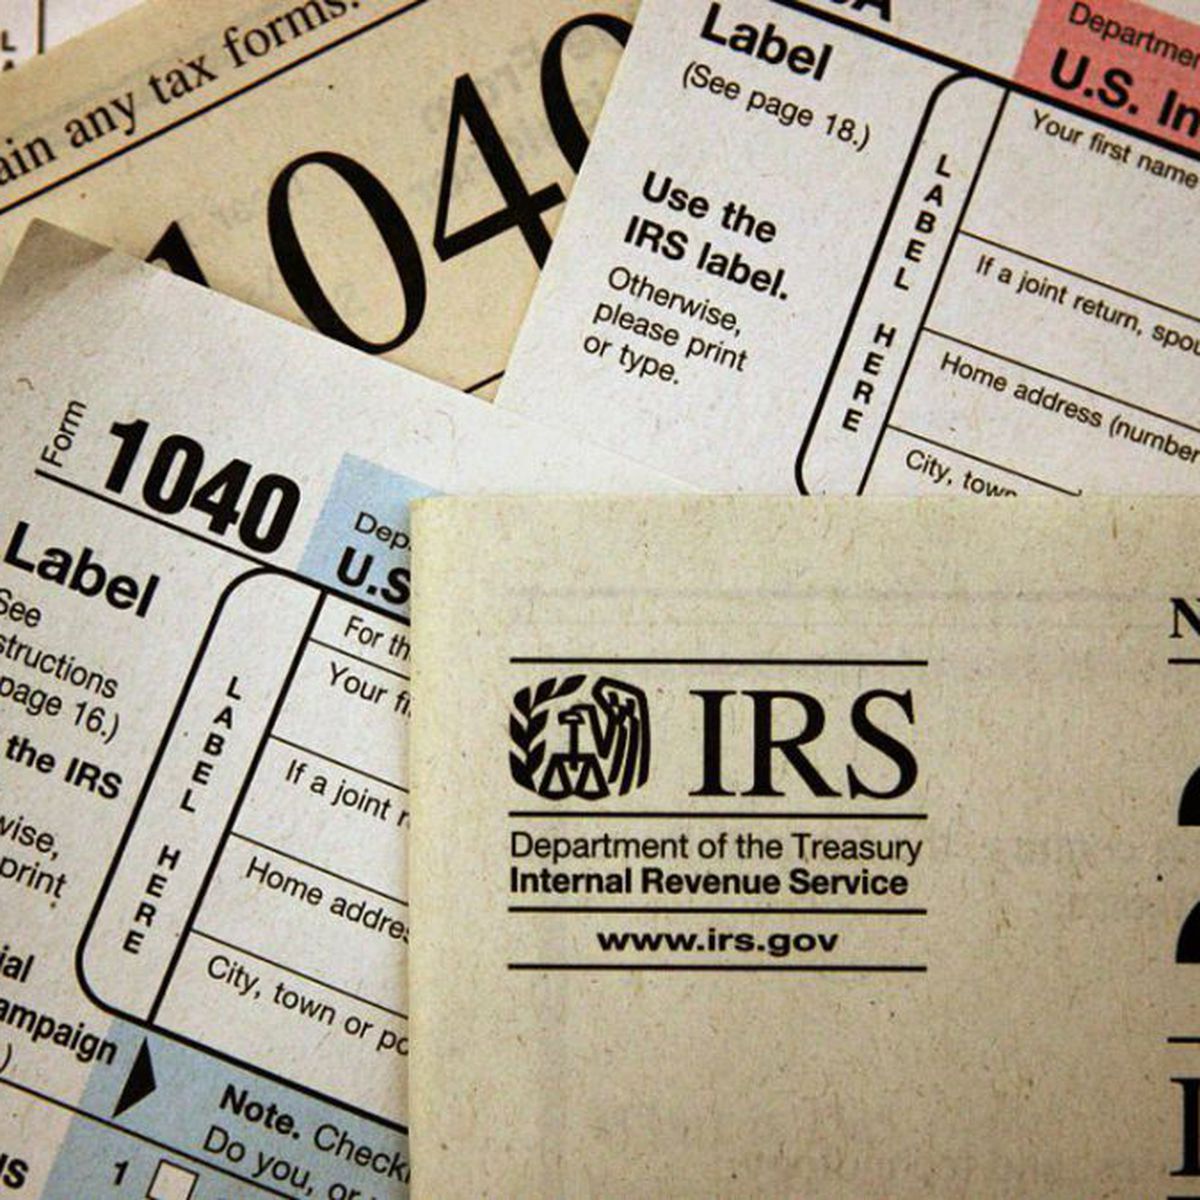 IRS ends unannounced revenue officer visits to taxpayers; major change to end confusion, enhance safety as part of larger agency transformation efforts